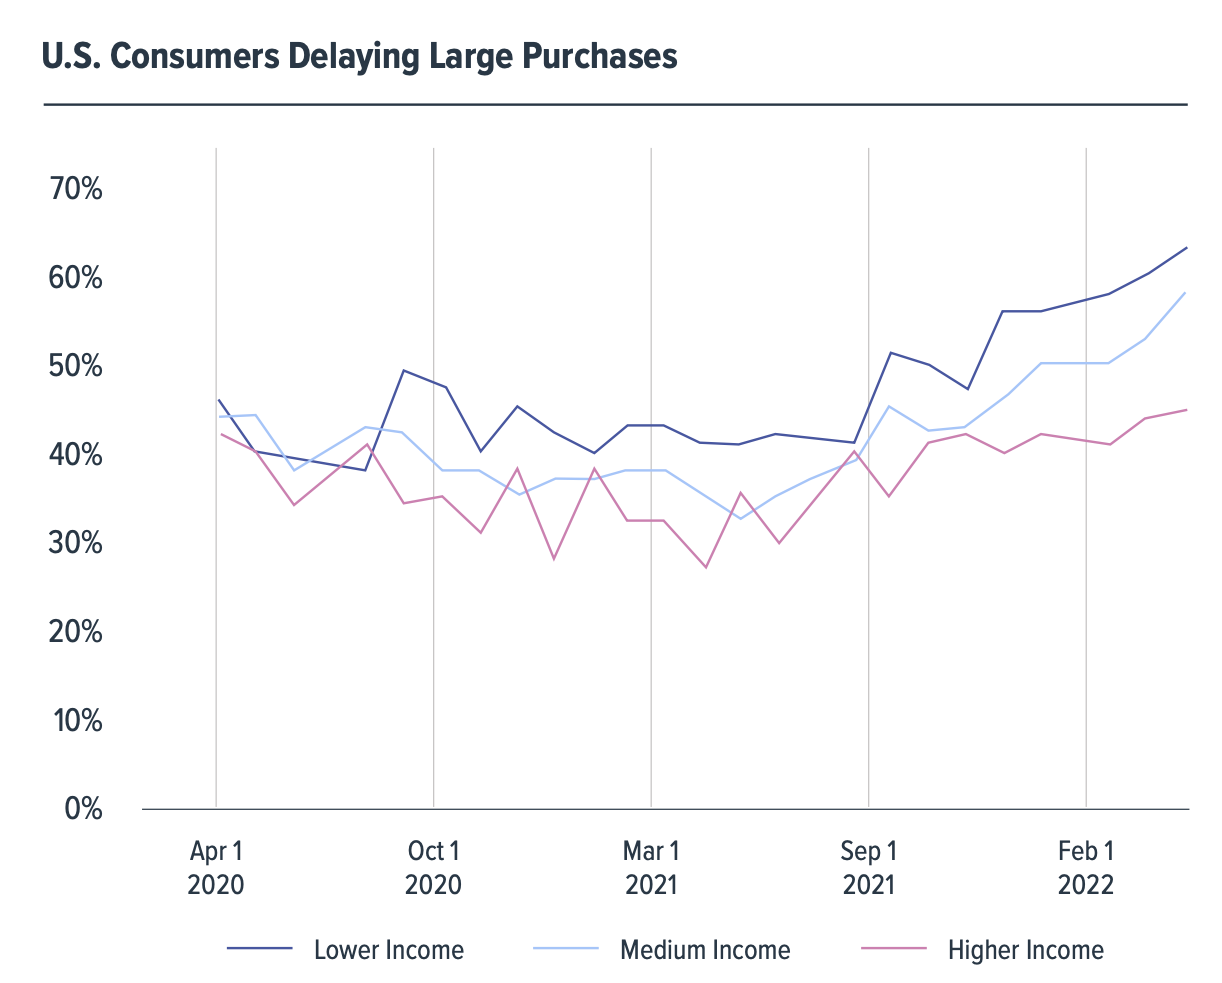 U.S. Consumers Delaying Large Purchases